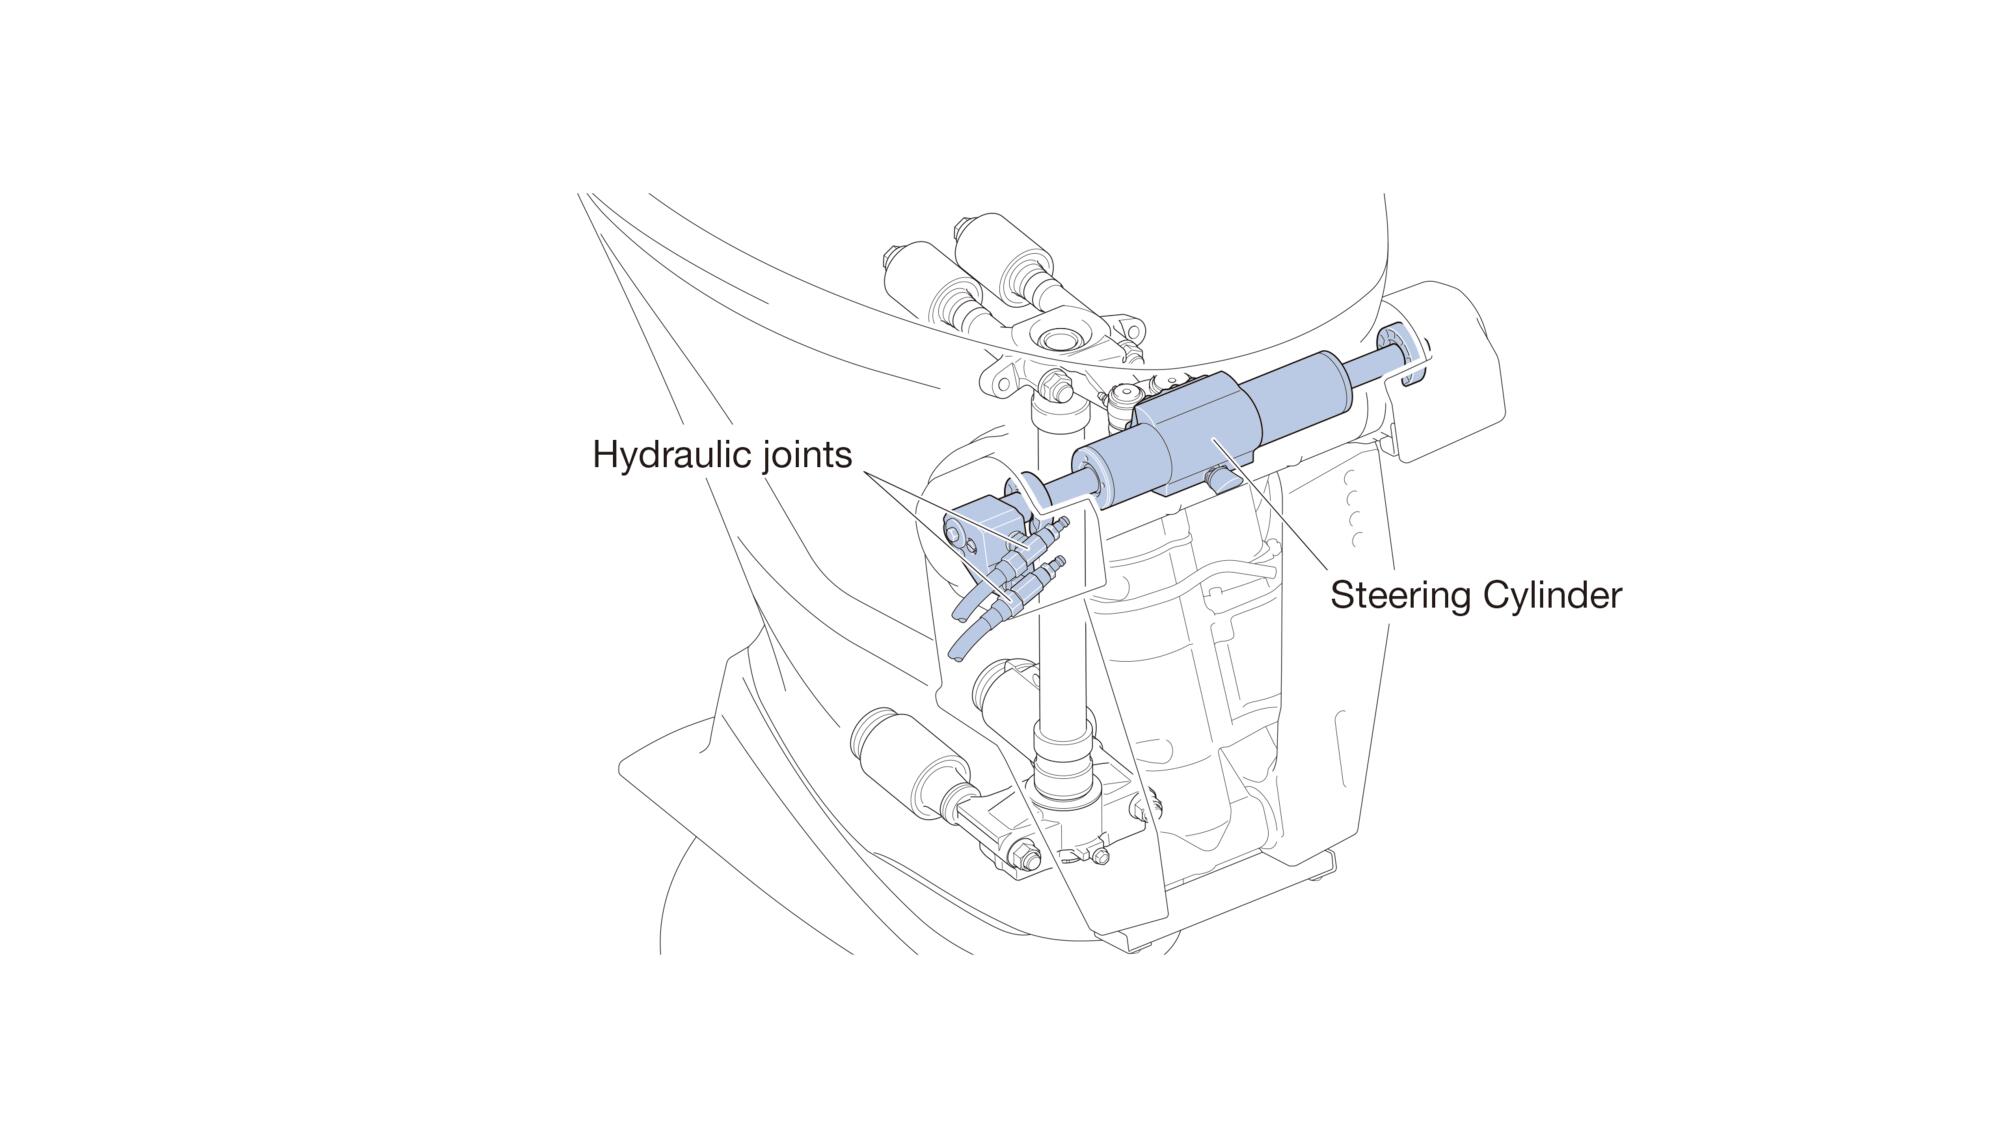 Optional integrated hydraulic steering.